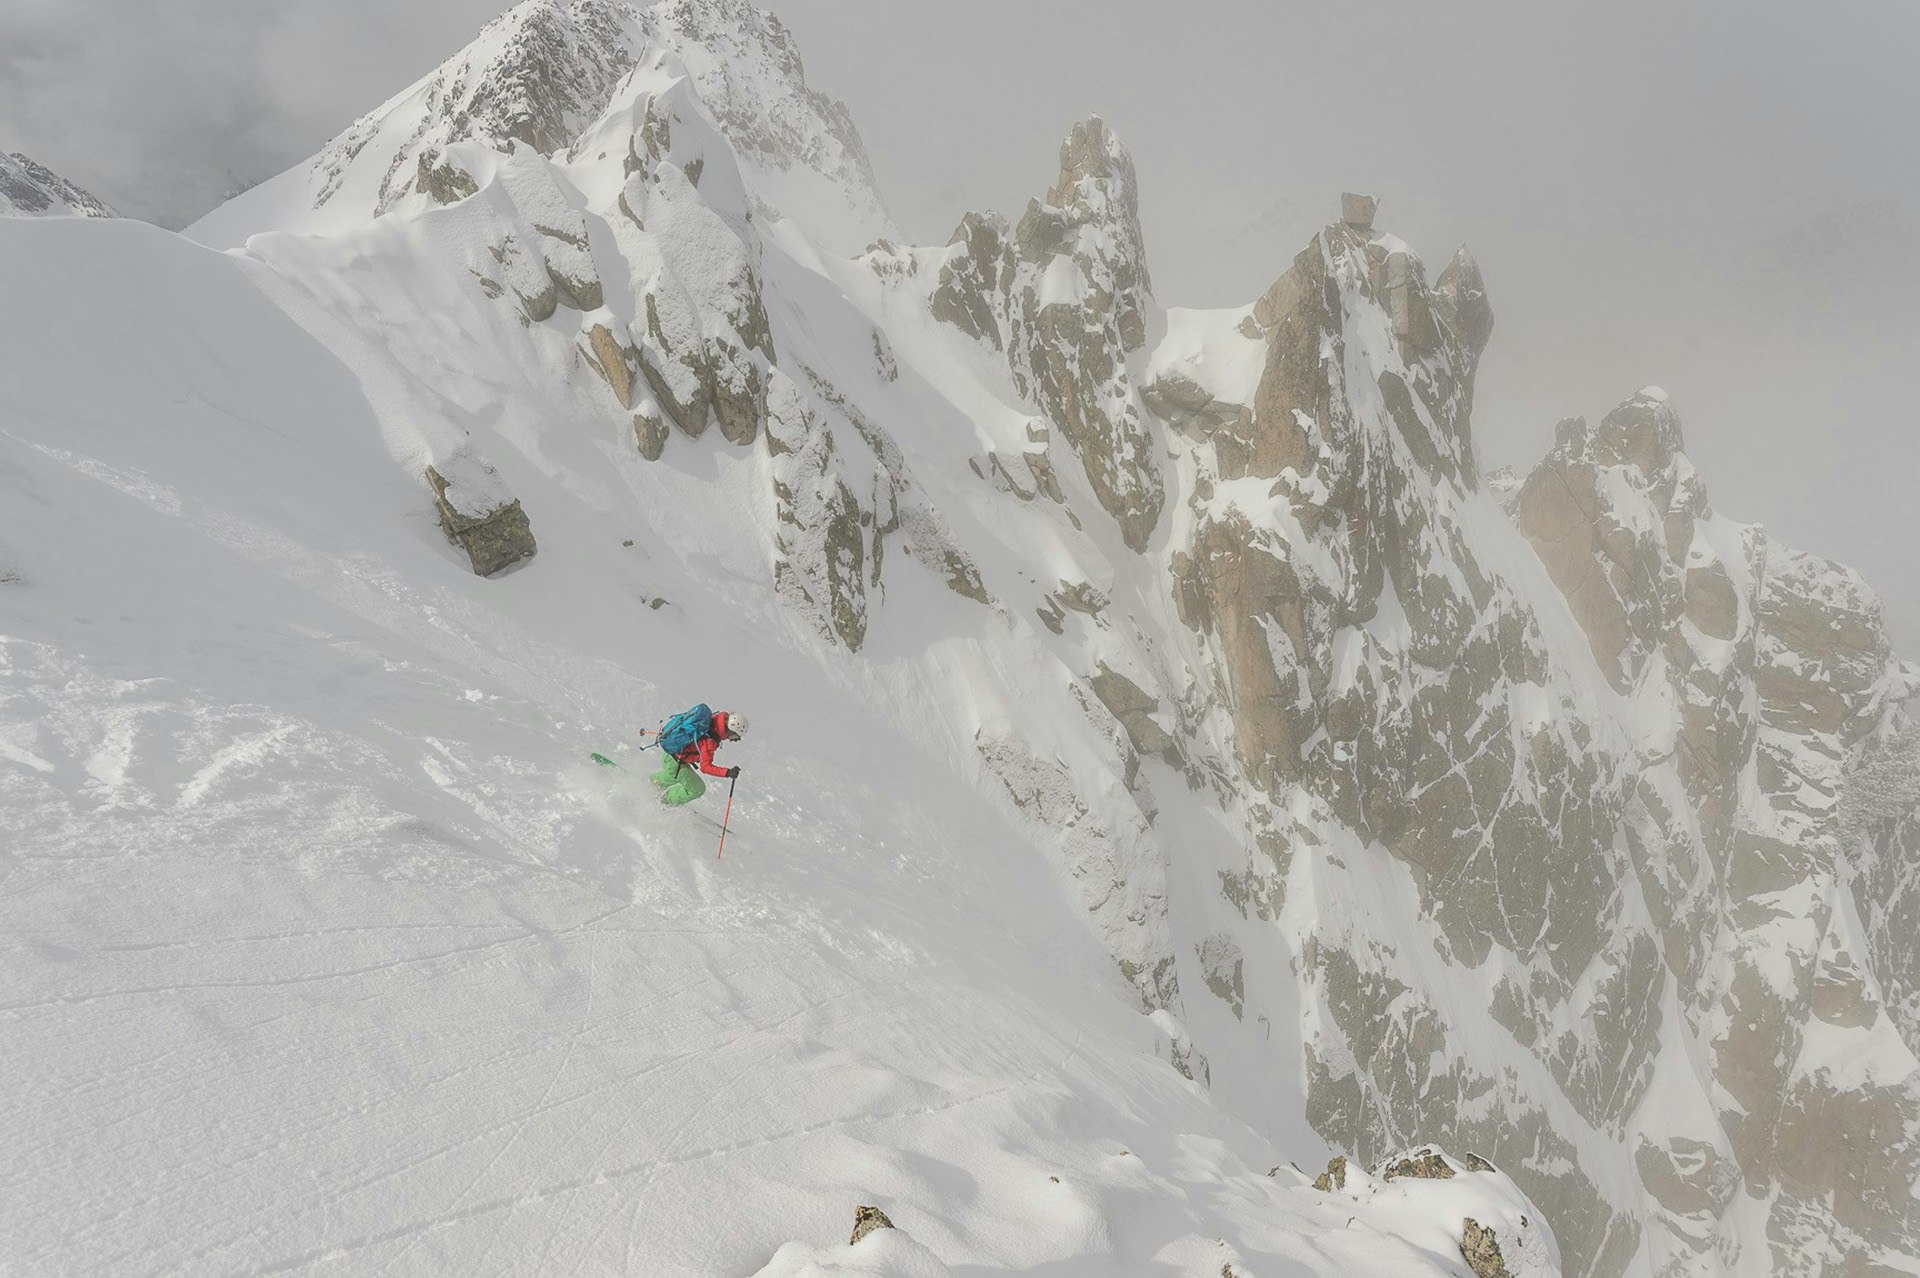 Crystal Wright skiing in the backcountry